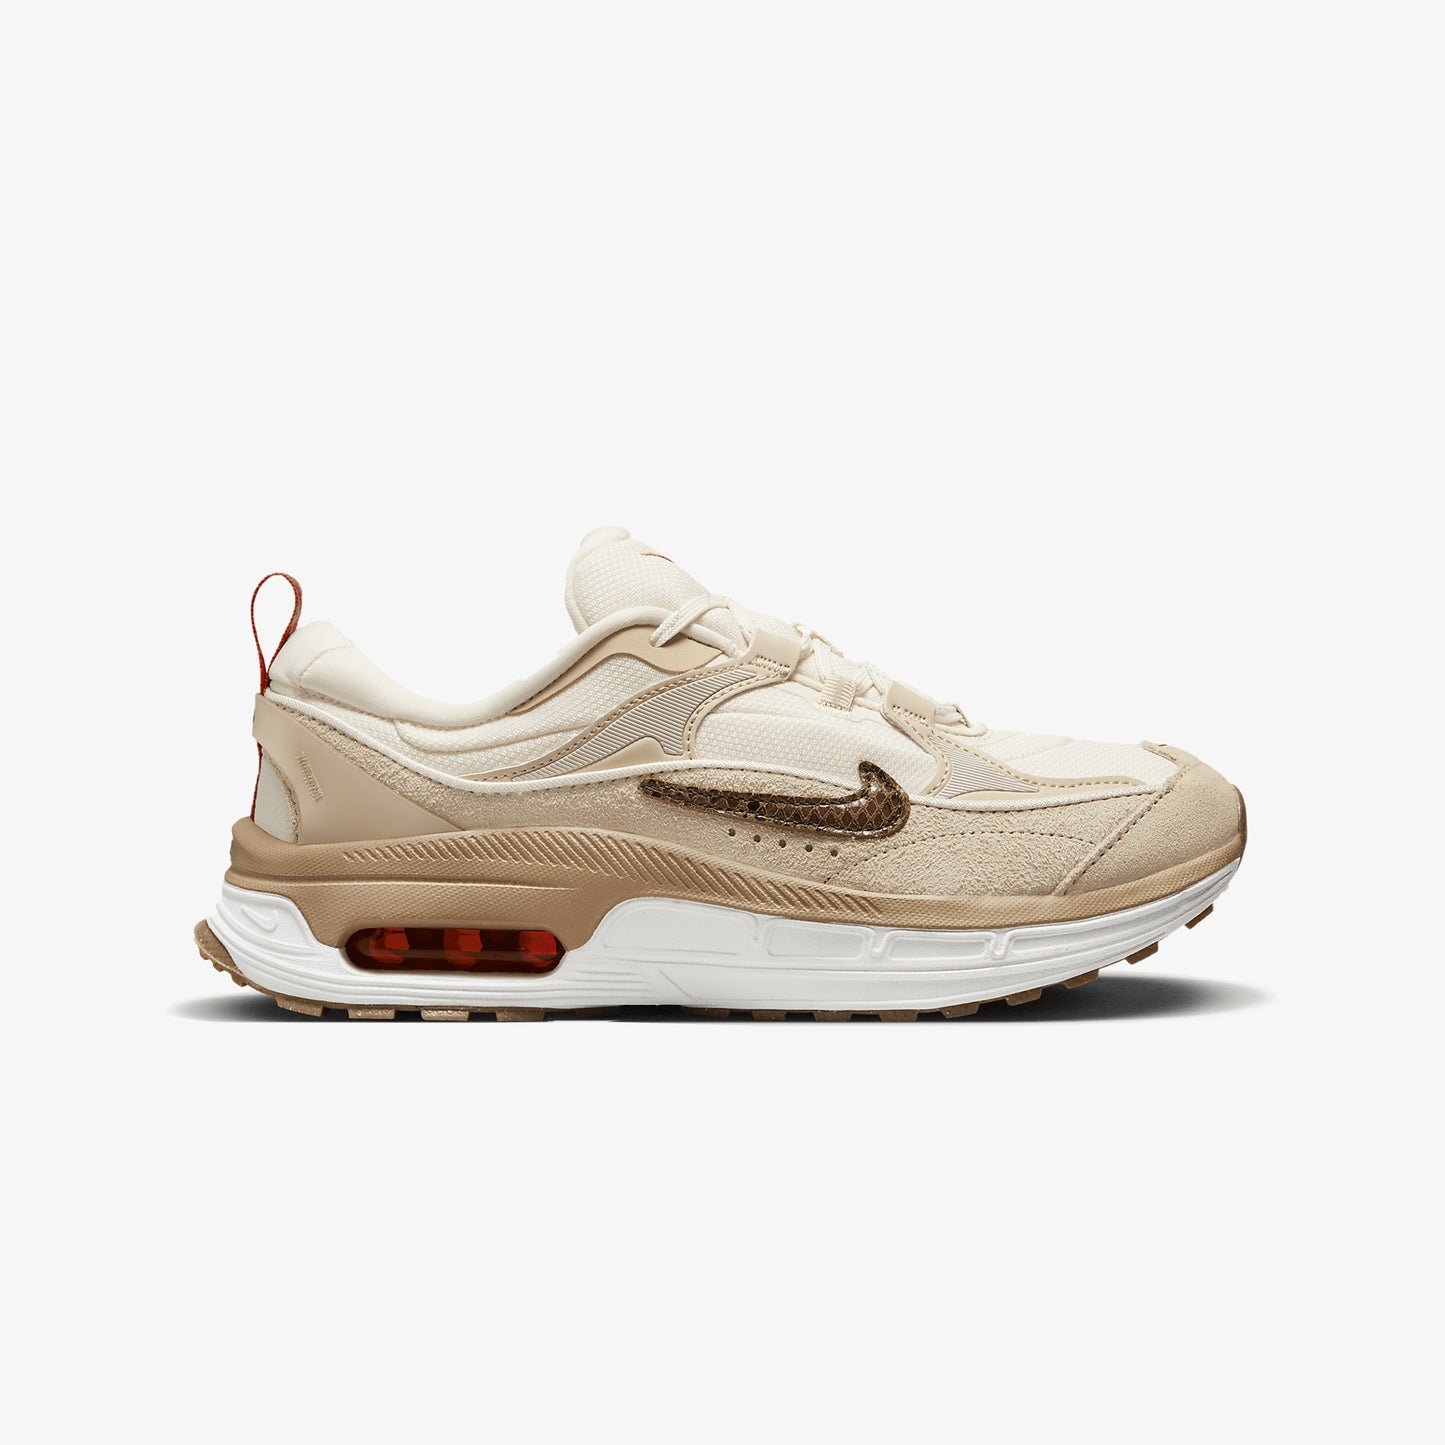 WMN'S AIR MAX BLISS SE 'PALE IVORY/PICANTE RED-SUMMIT WHITE'